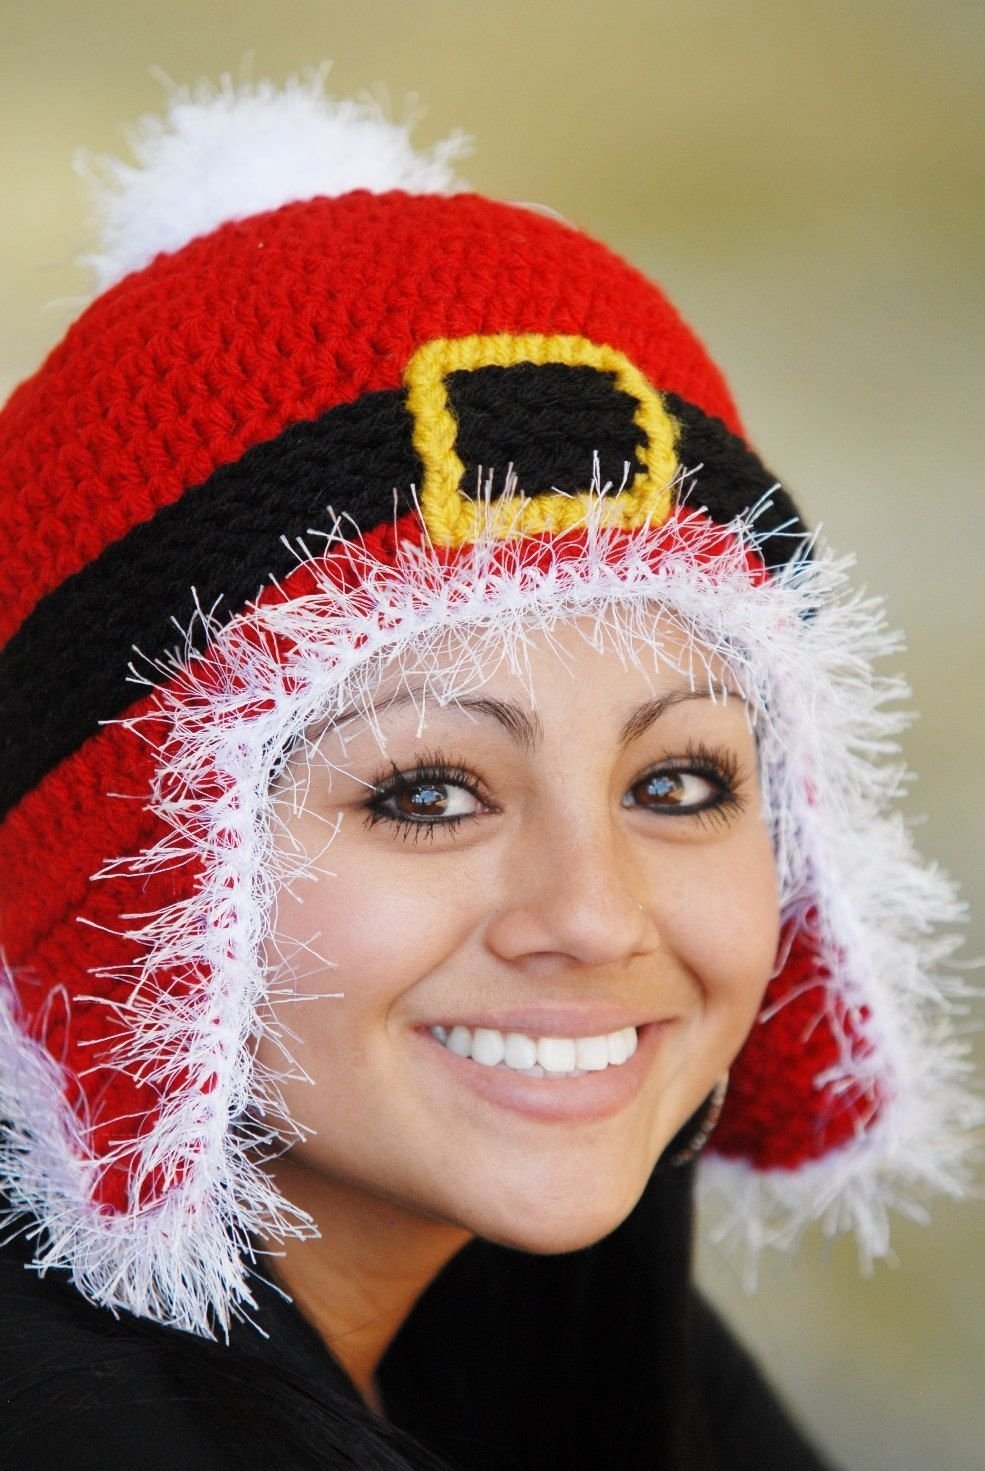 10 Stylish Crazy Hat Ideas For Adults christmas crochet nikki barnett this has you all over it 2022